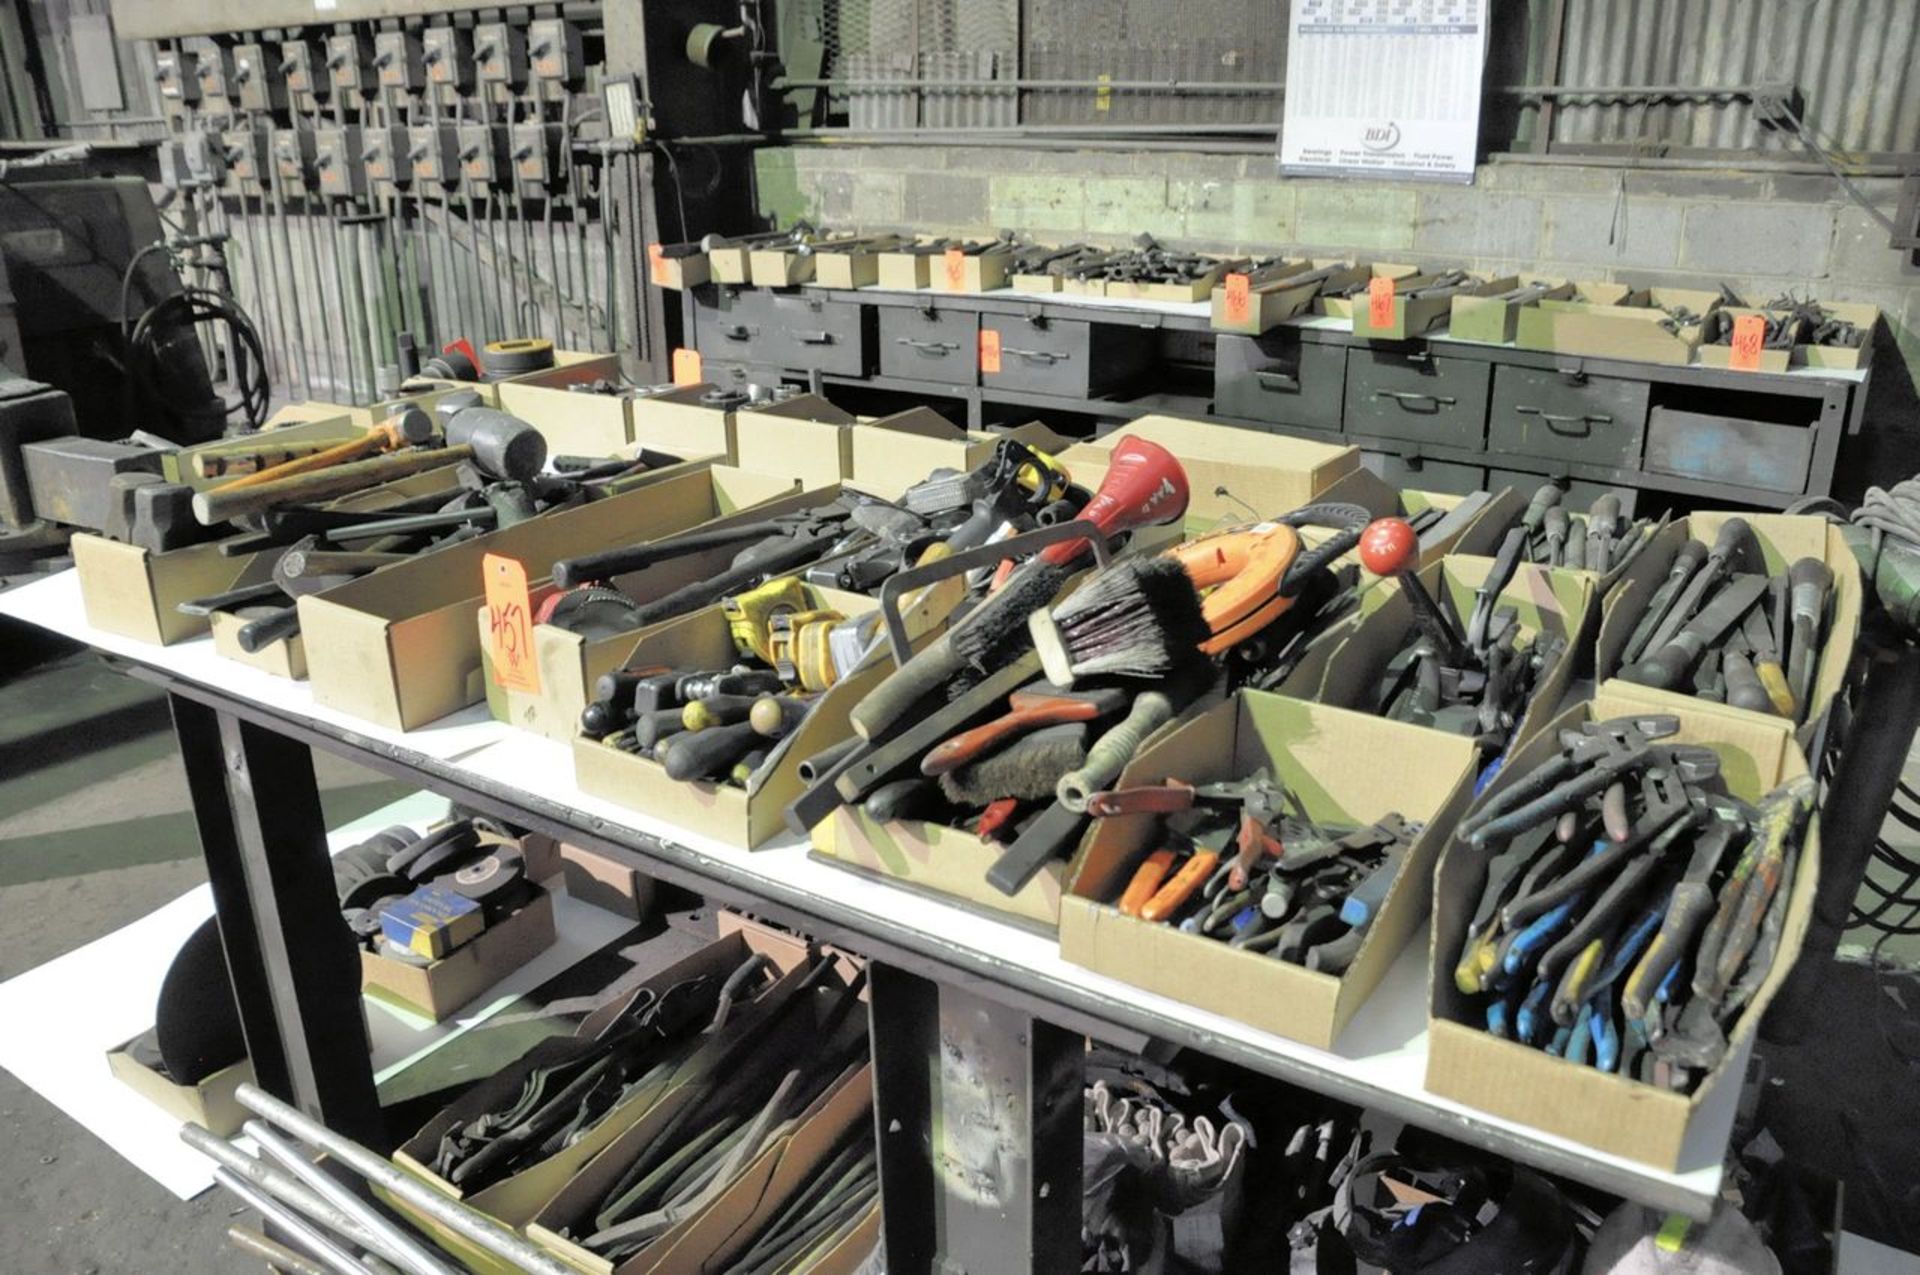 Lot - Sledge Hammers, Rubber Mallets, Pry Bars, Hole Saws, Tape Measures, Screwdrivers, Brushes,